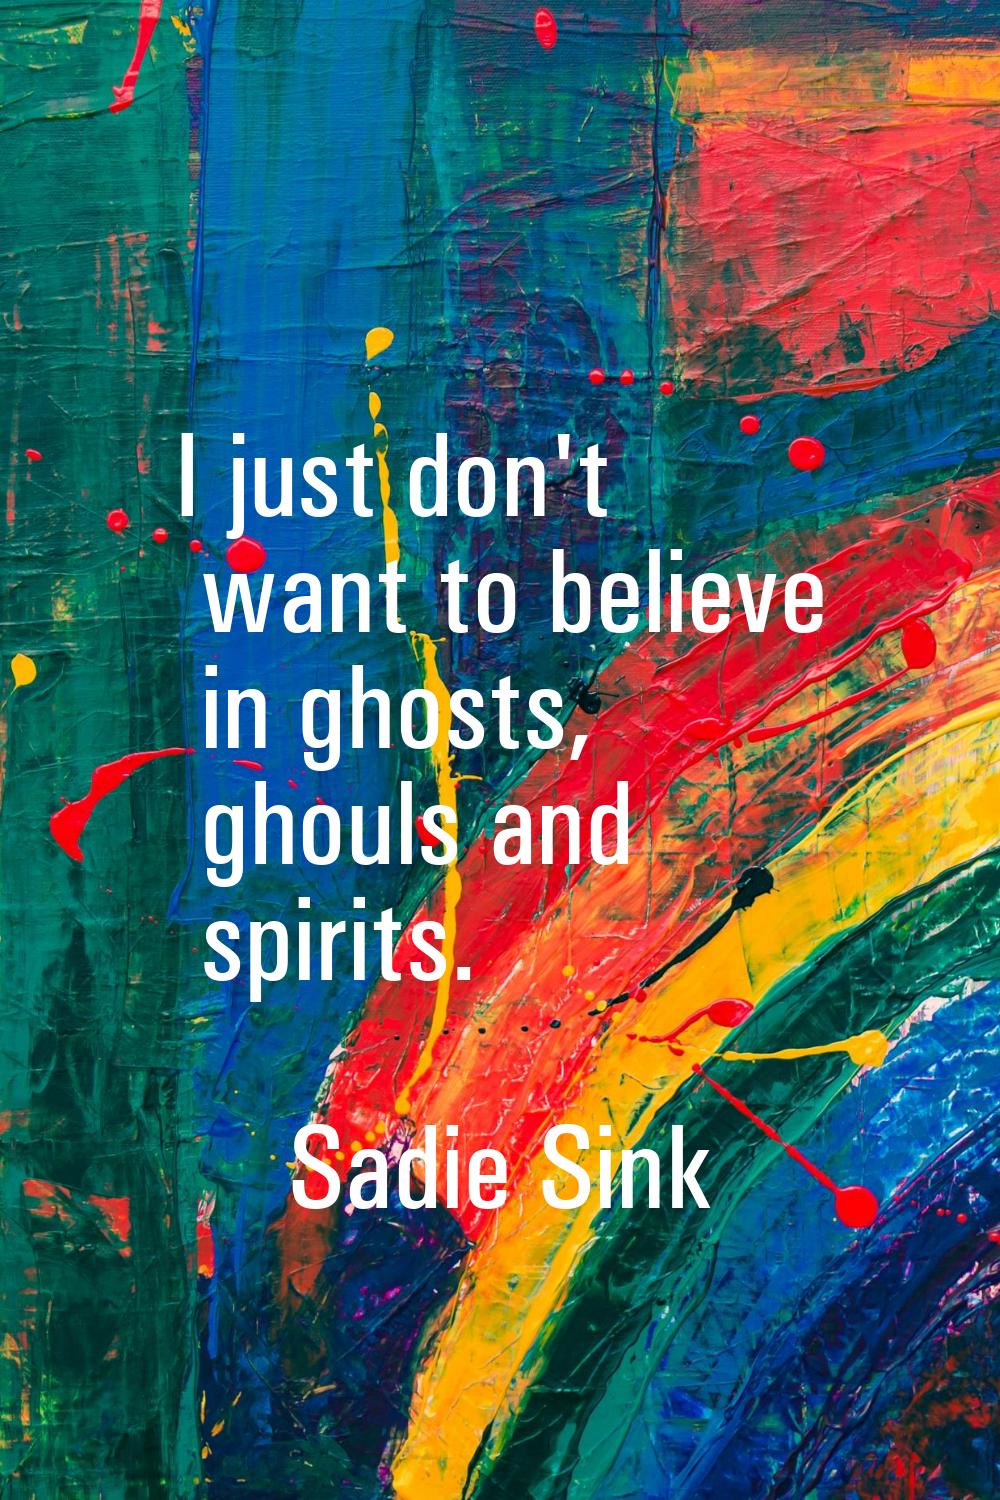 I just don't want to believe in ghosts, ghouls and spirits.